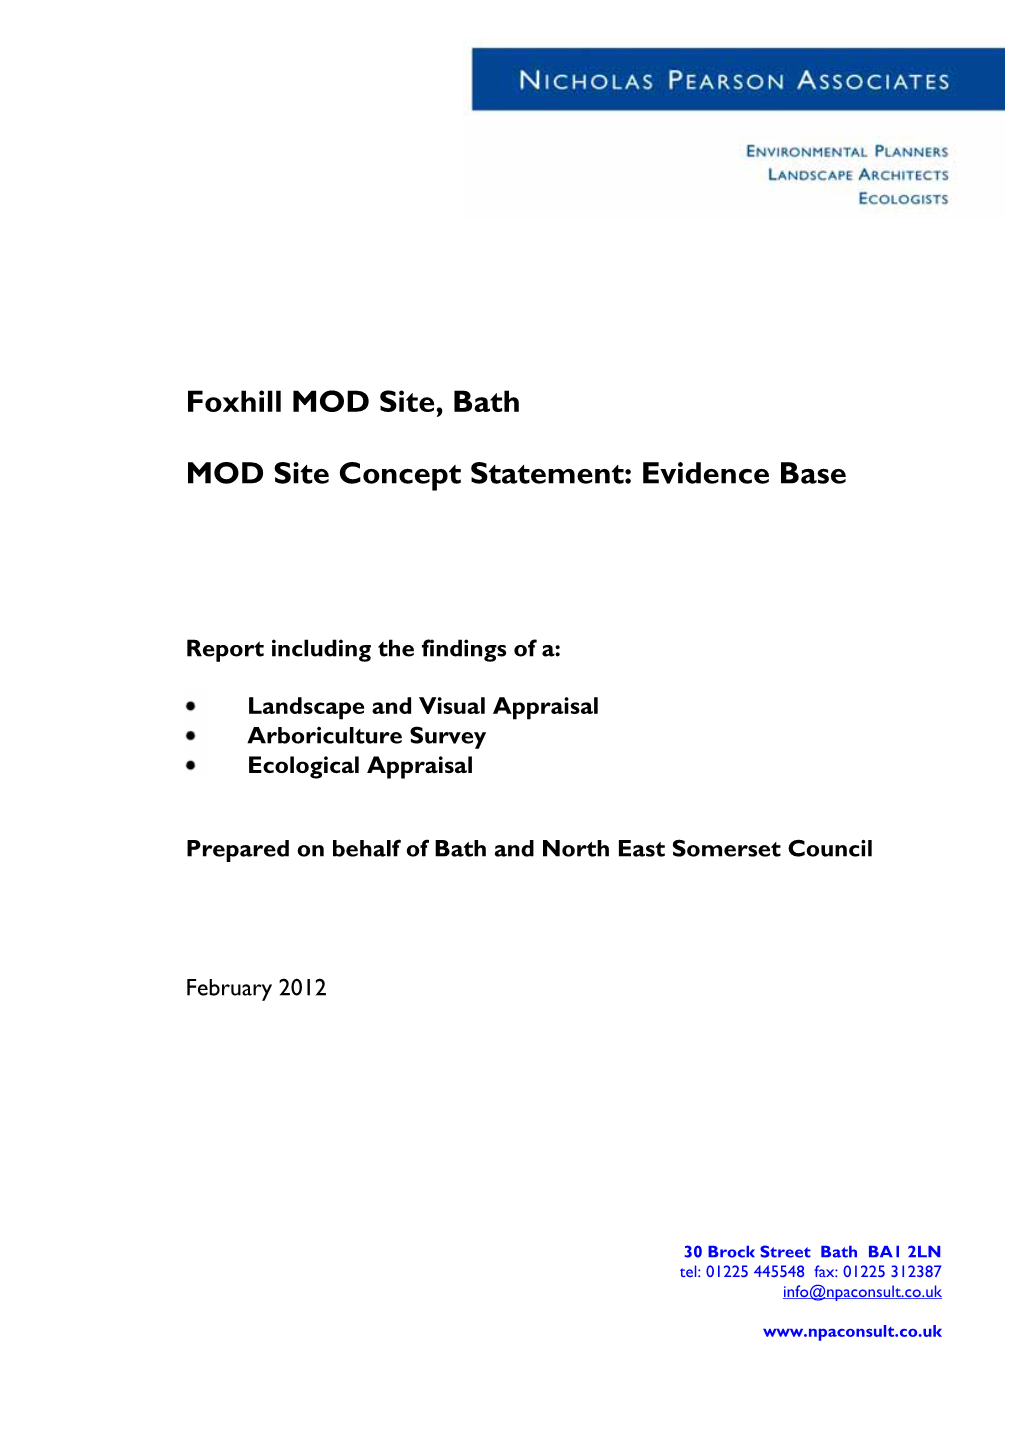 Foxhill MOD Site, Bath MOD Site Concept Statement: Evidence Base Report Landscape and Visual, Arboriculture and Ecological Matters